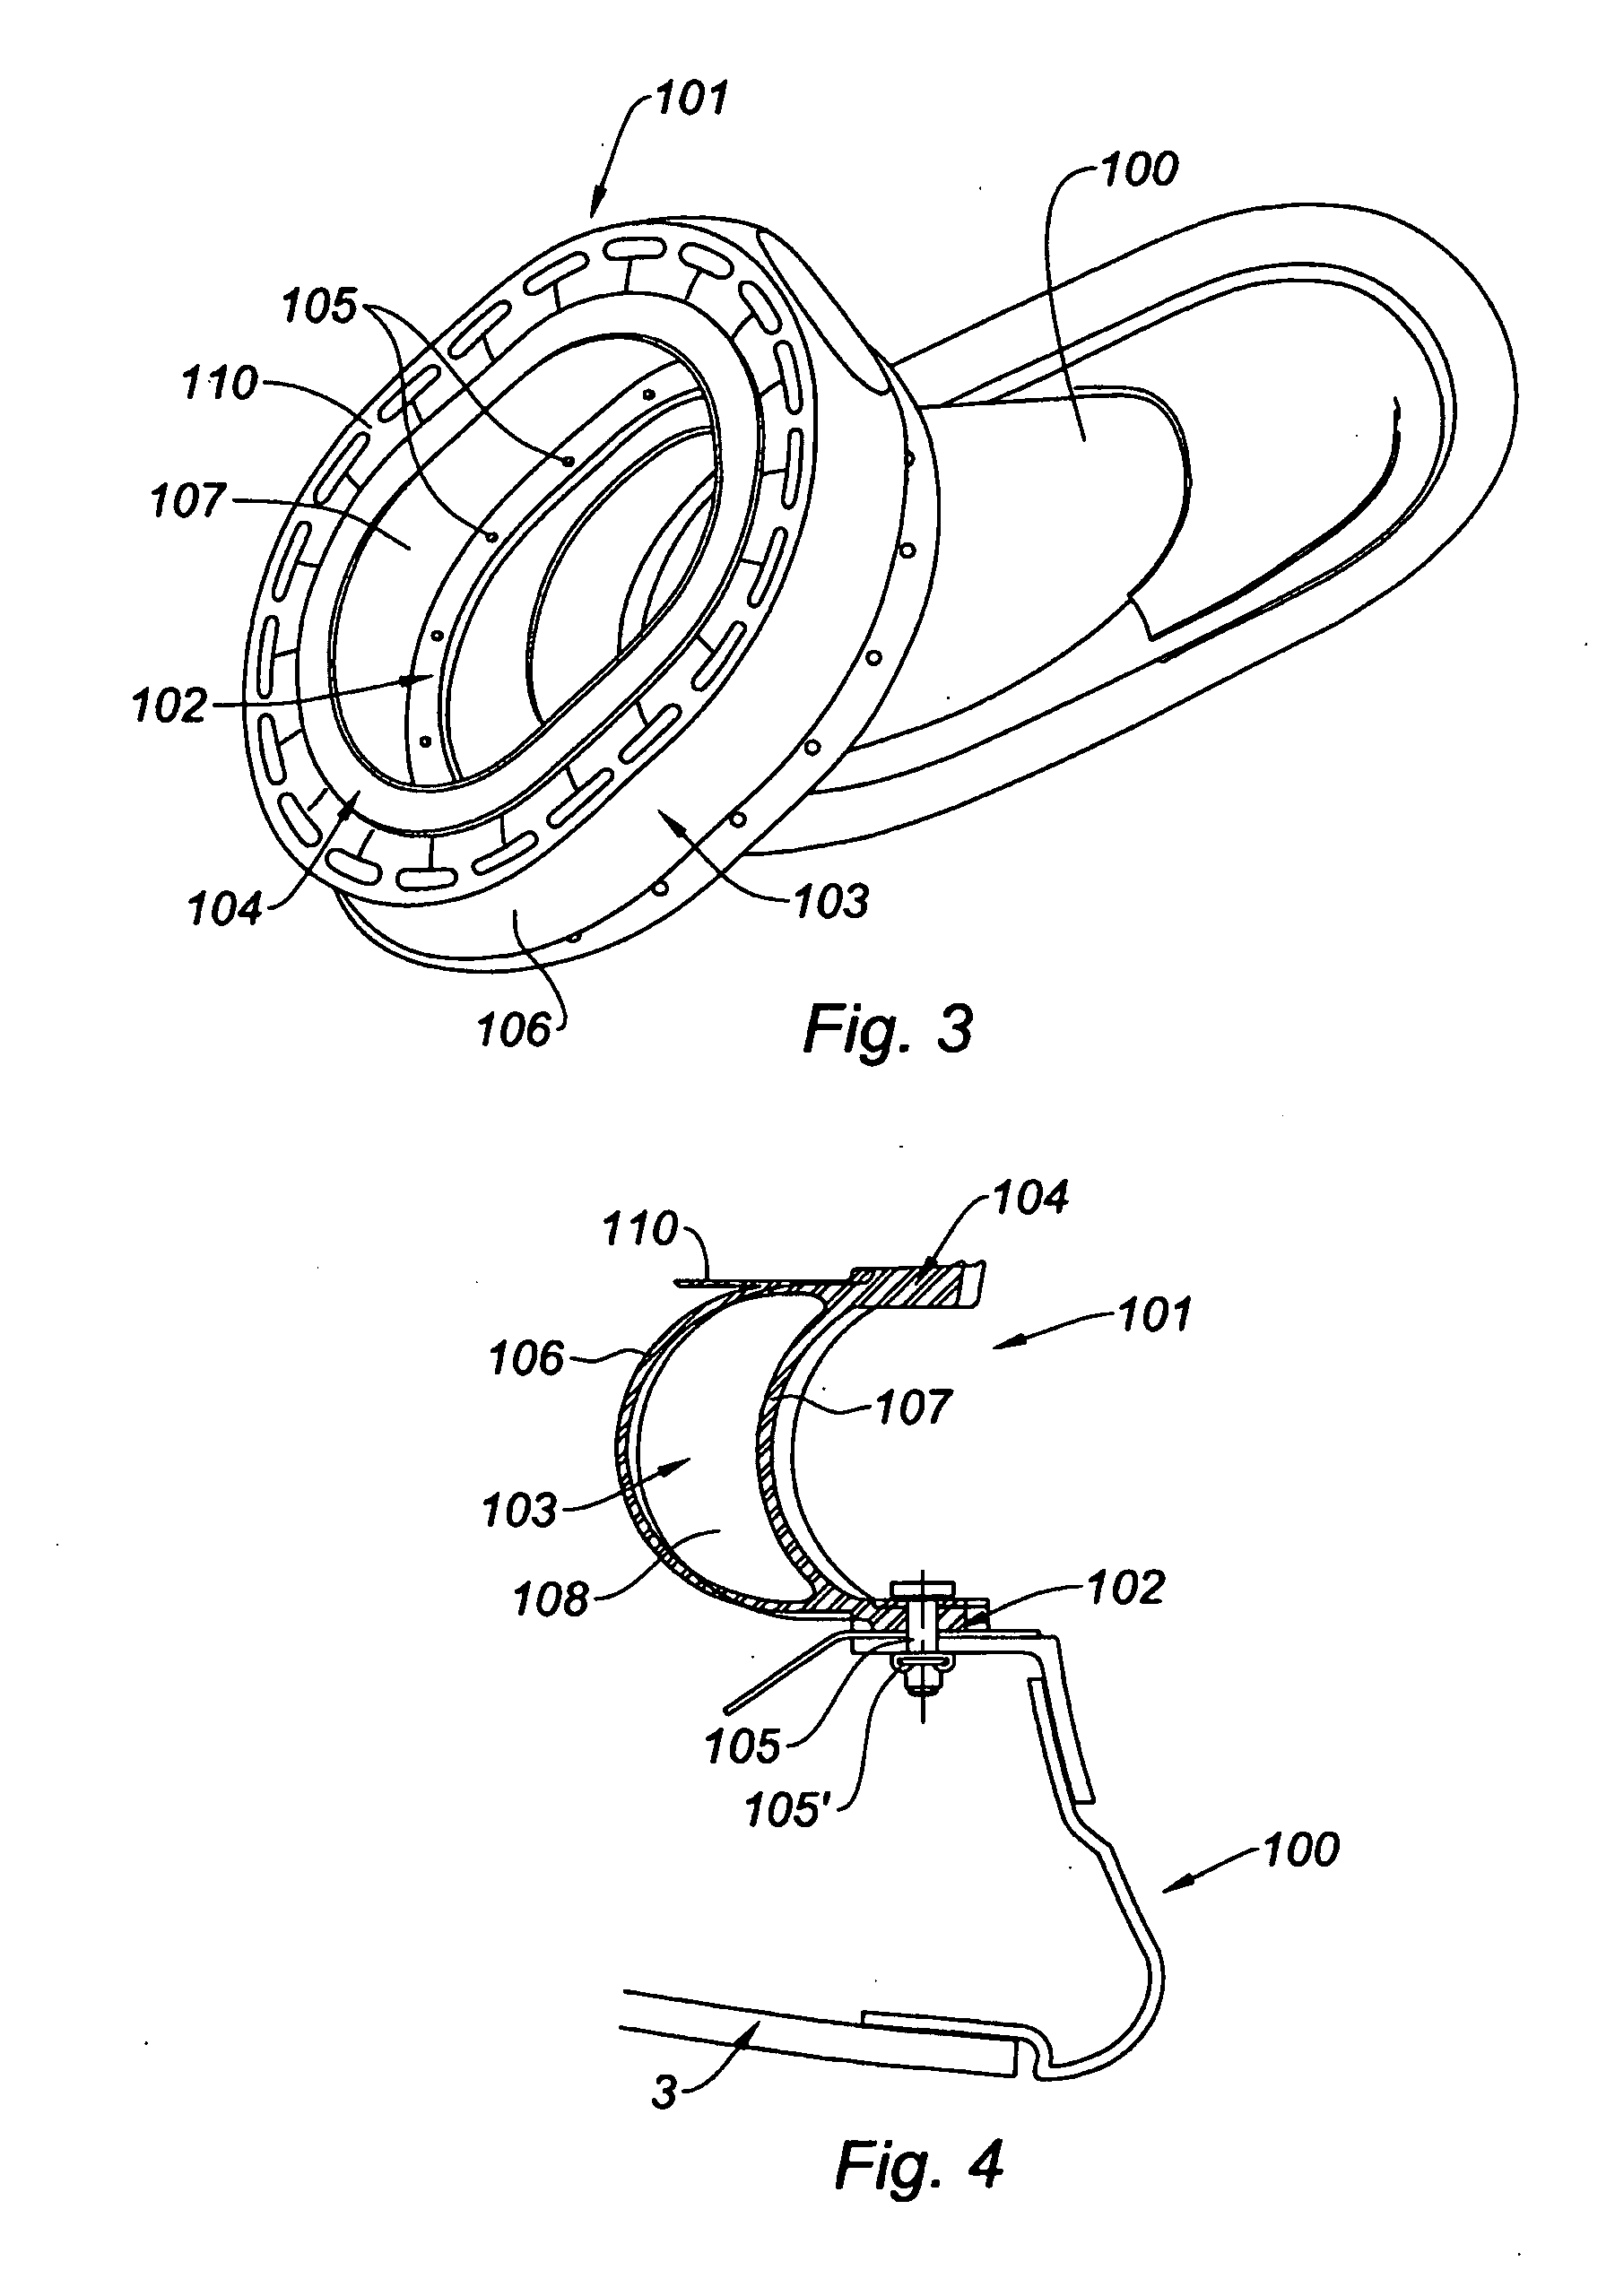 Sealing joint with integrated mating surface